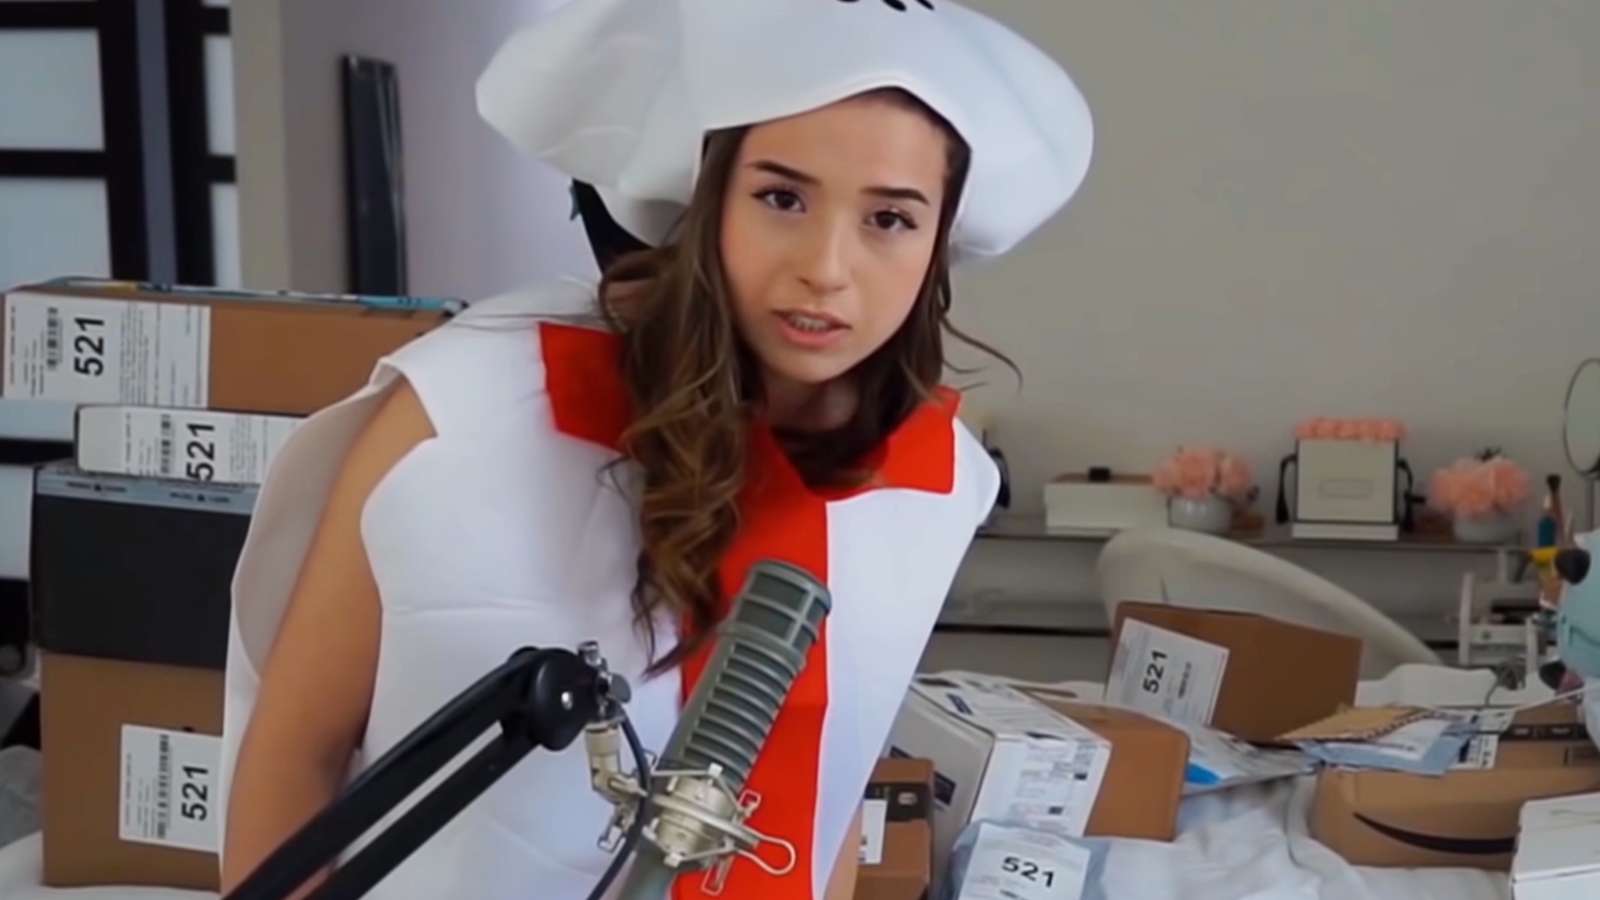 Pokimane unwraps presents in a Christmas costume on Twitch.